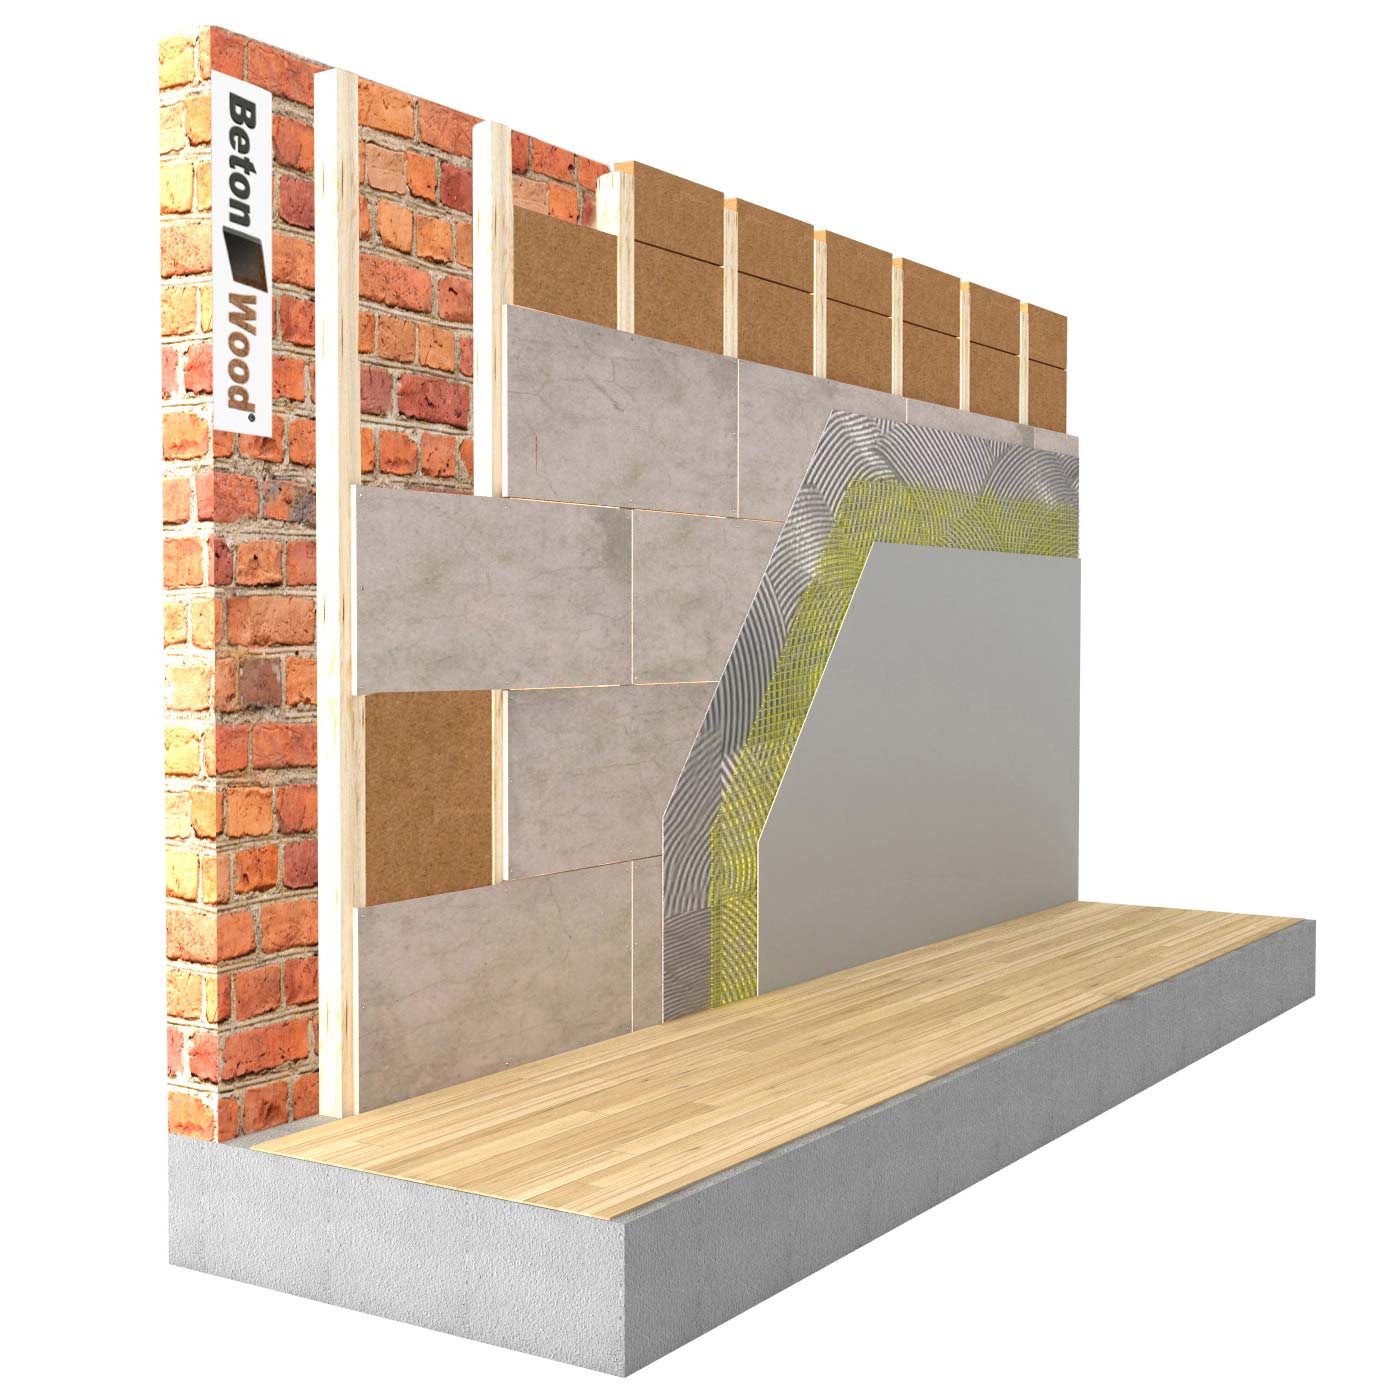 Internal insulation system with Therm wood fiber on masonry